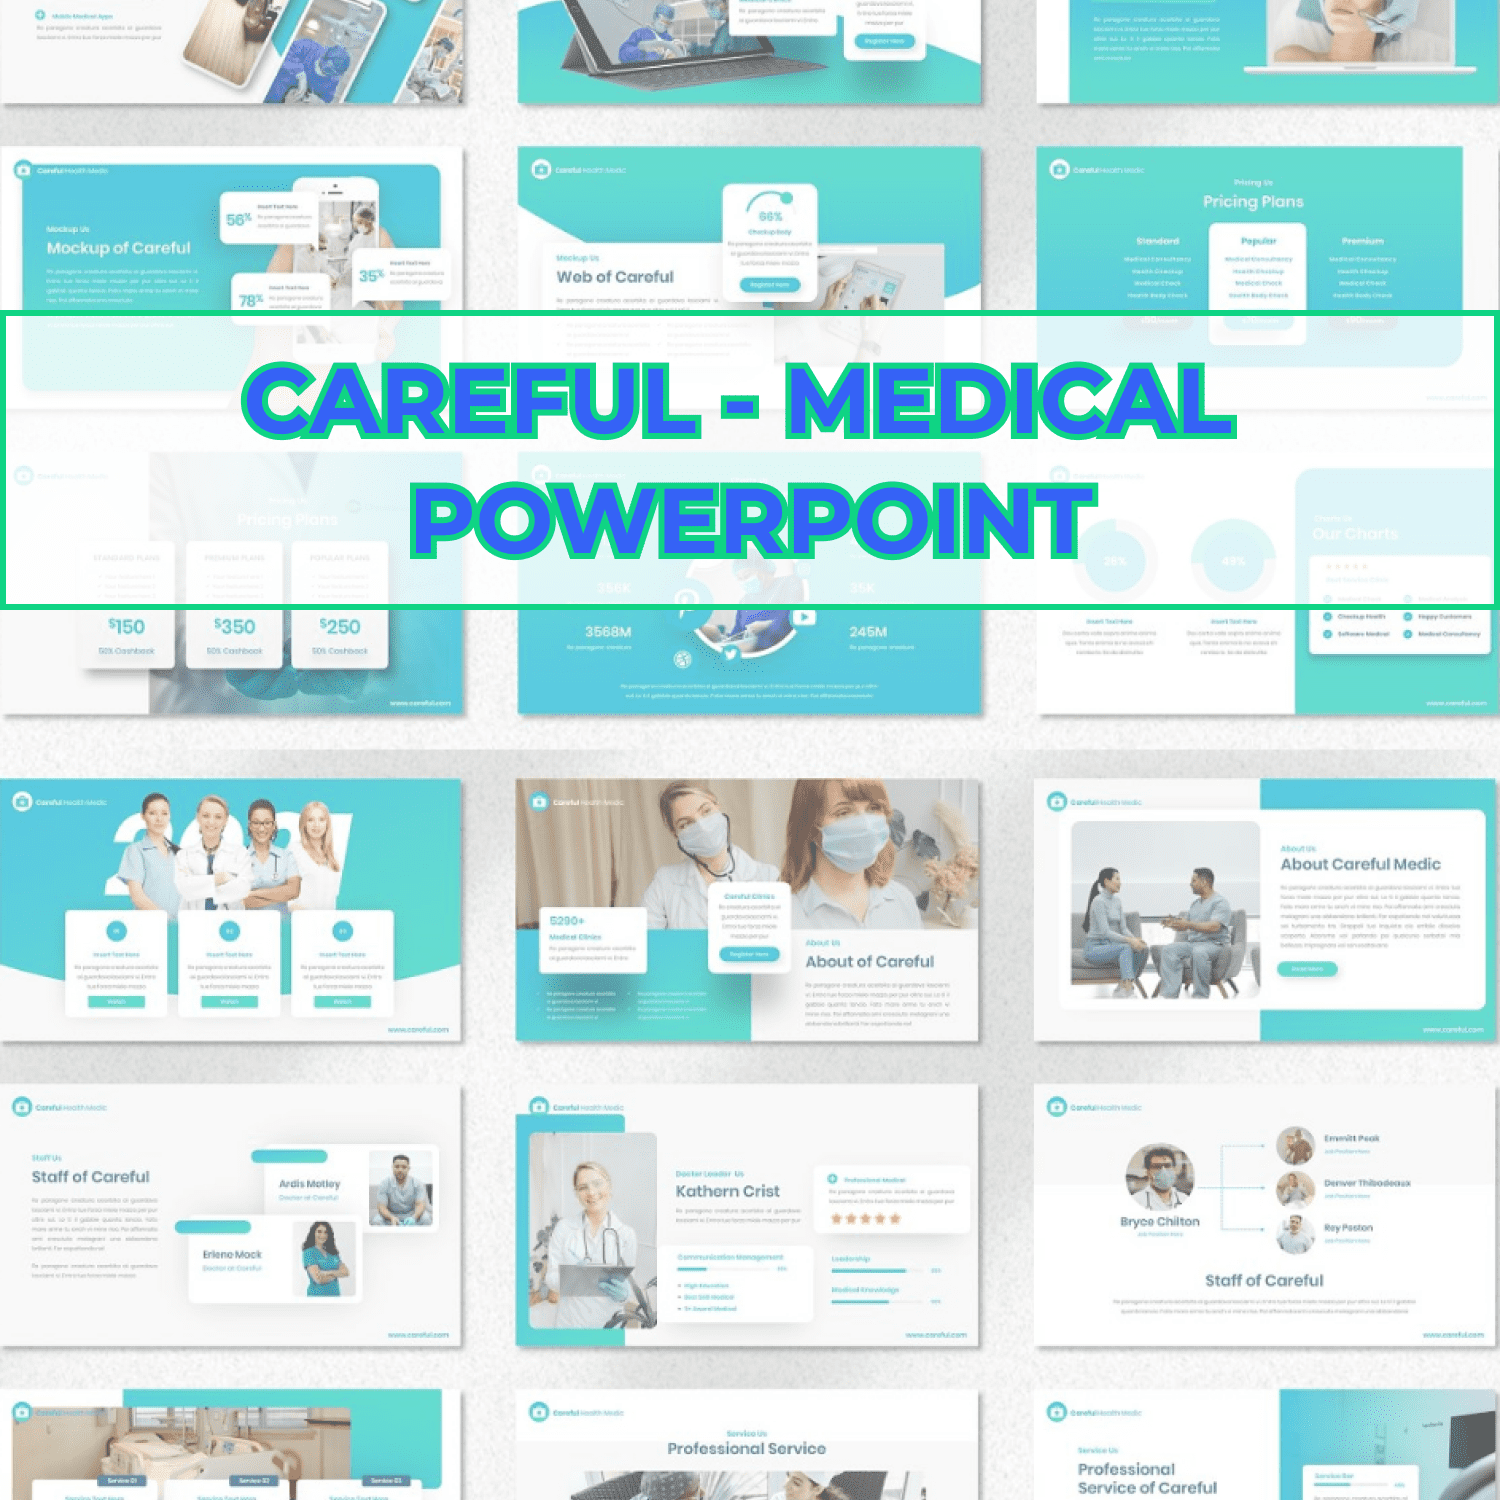 Careful - Medical Powerpoint cover image.